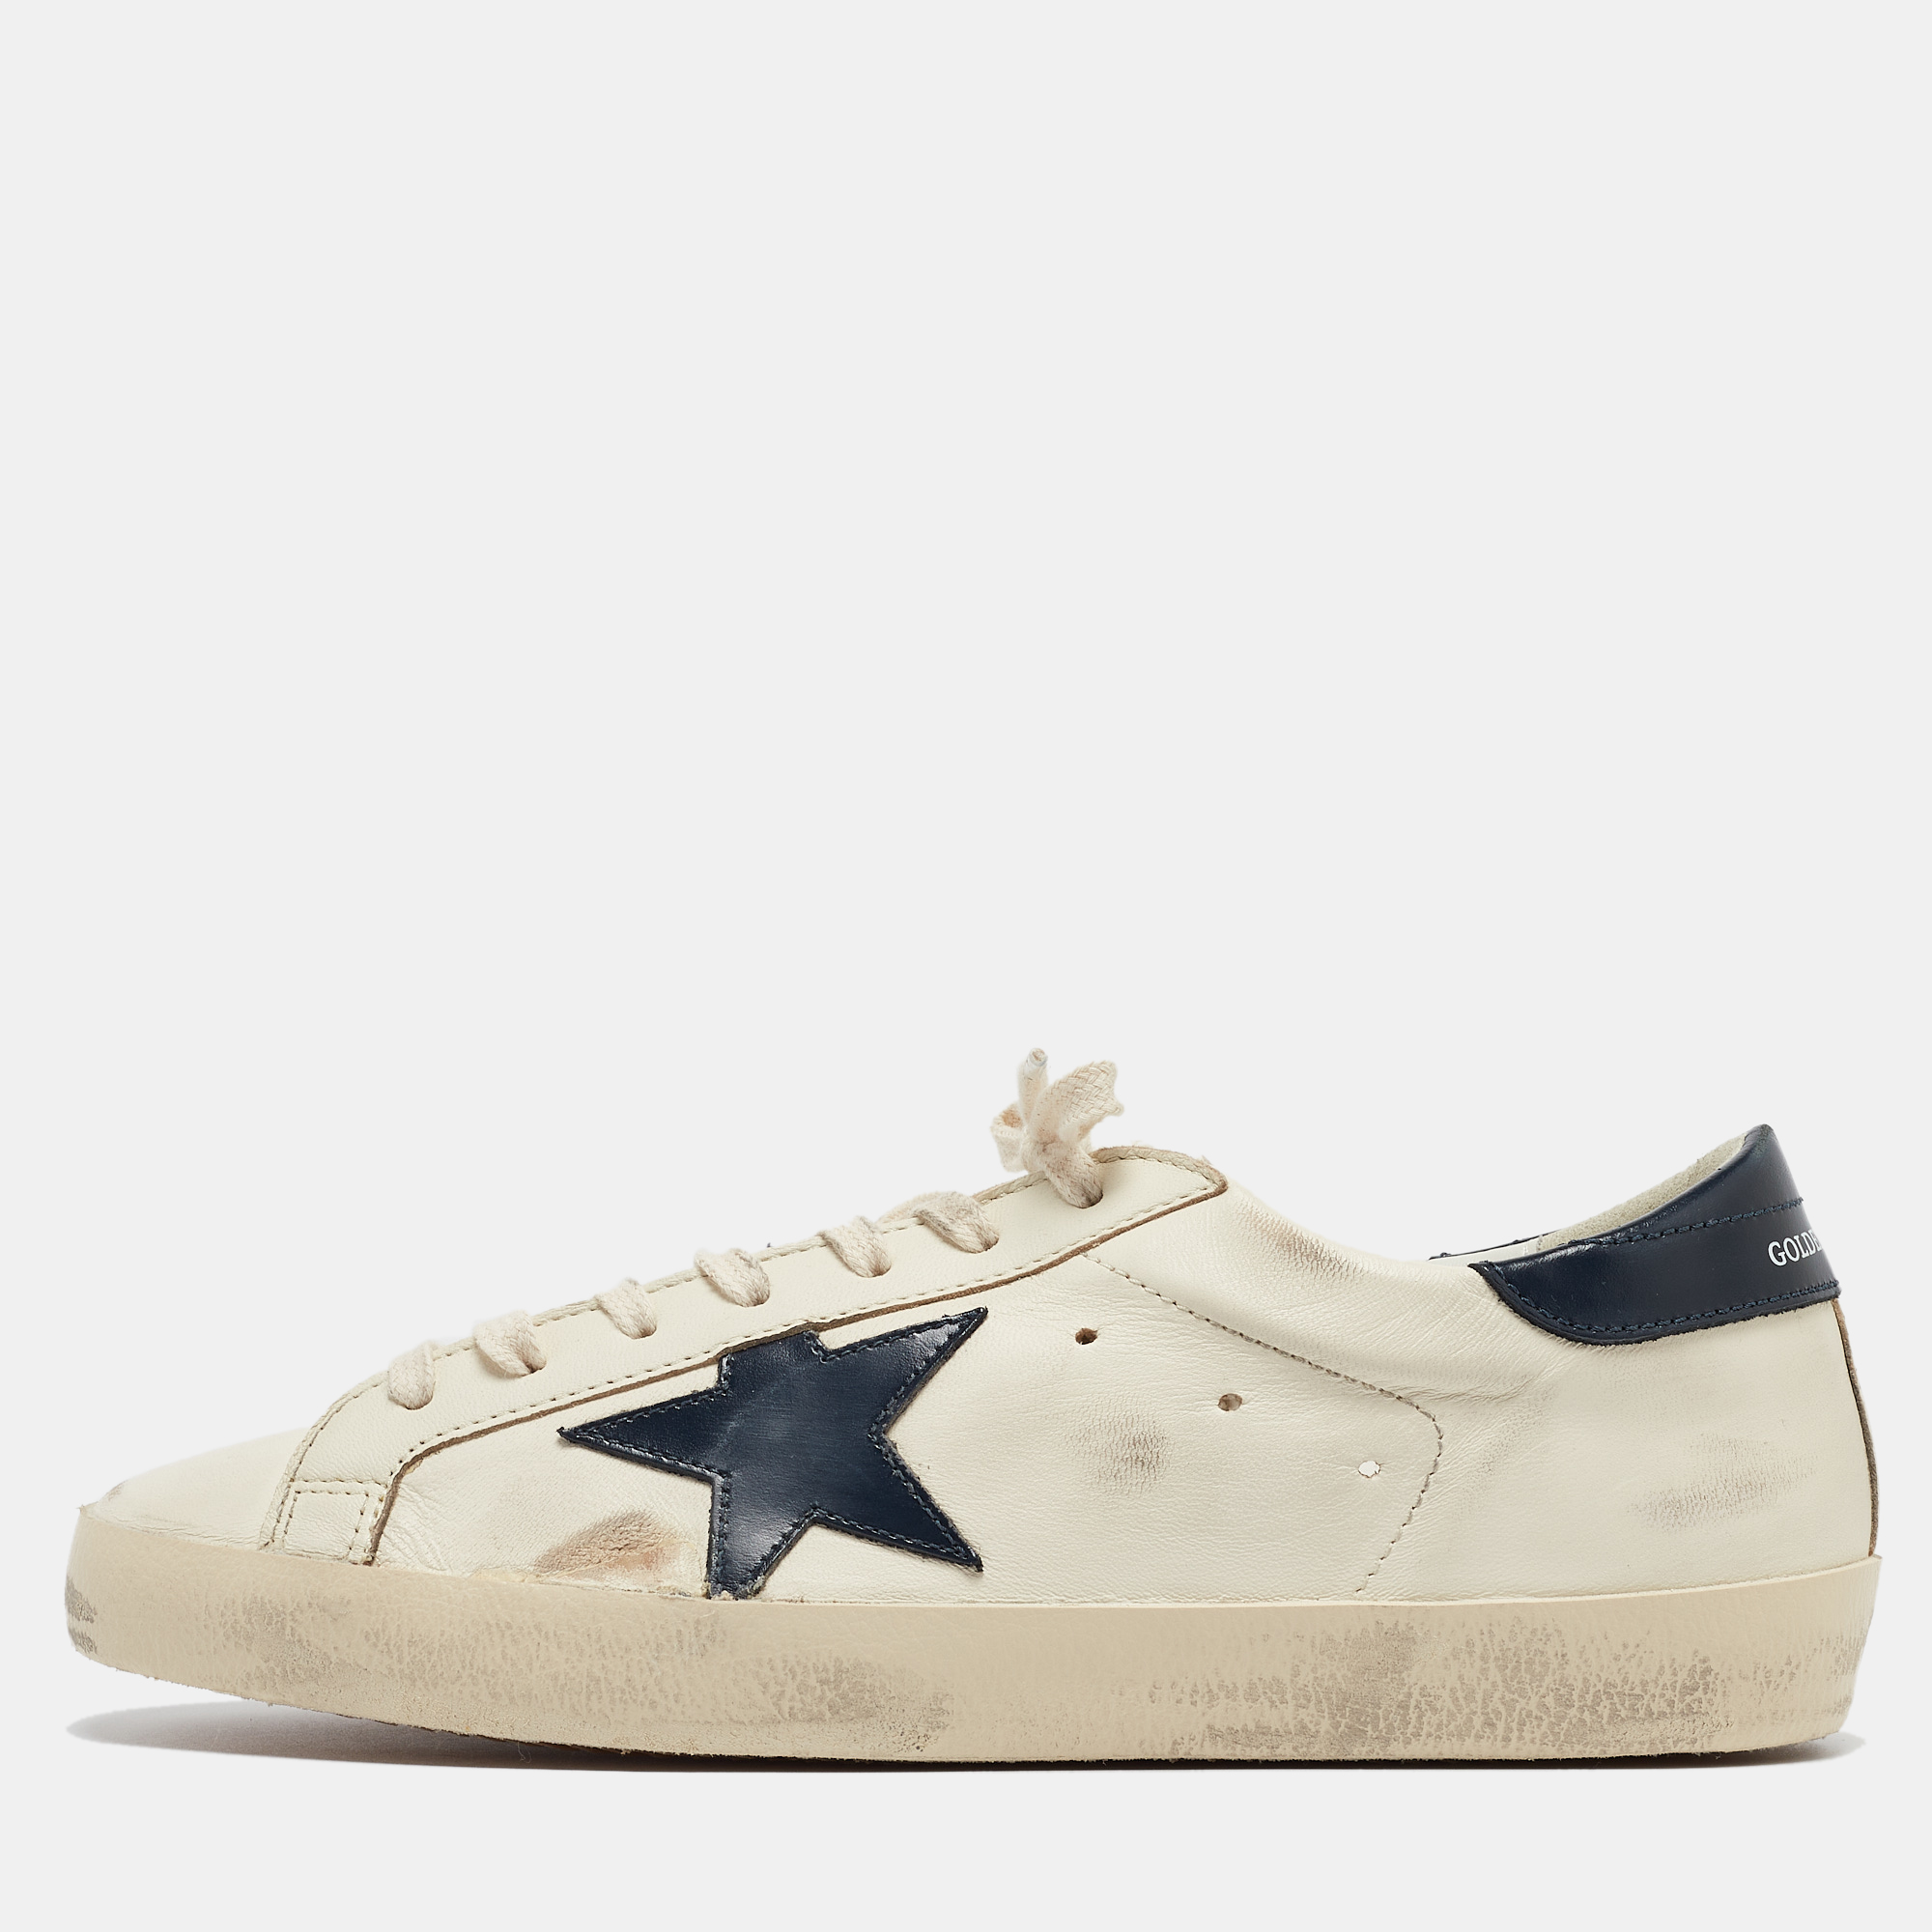 Golden goose cream/navy blue leather superstar sneakers size 42